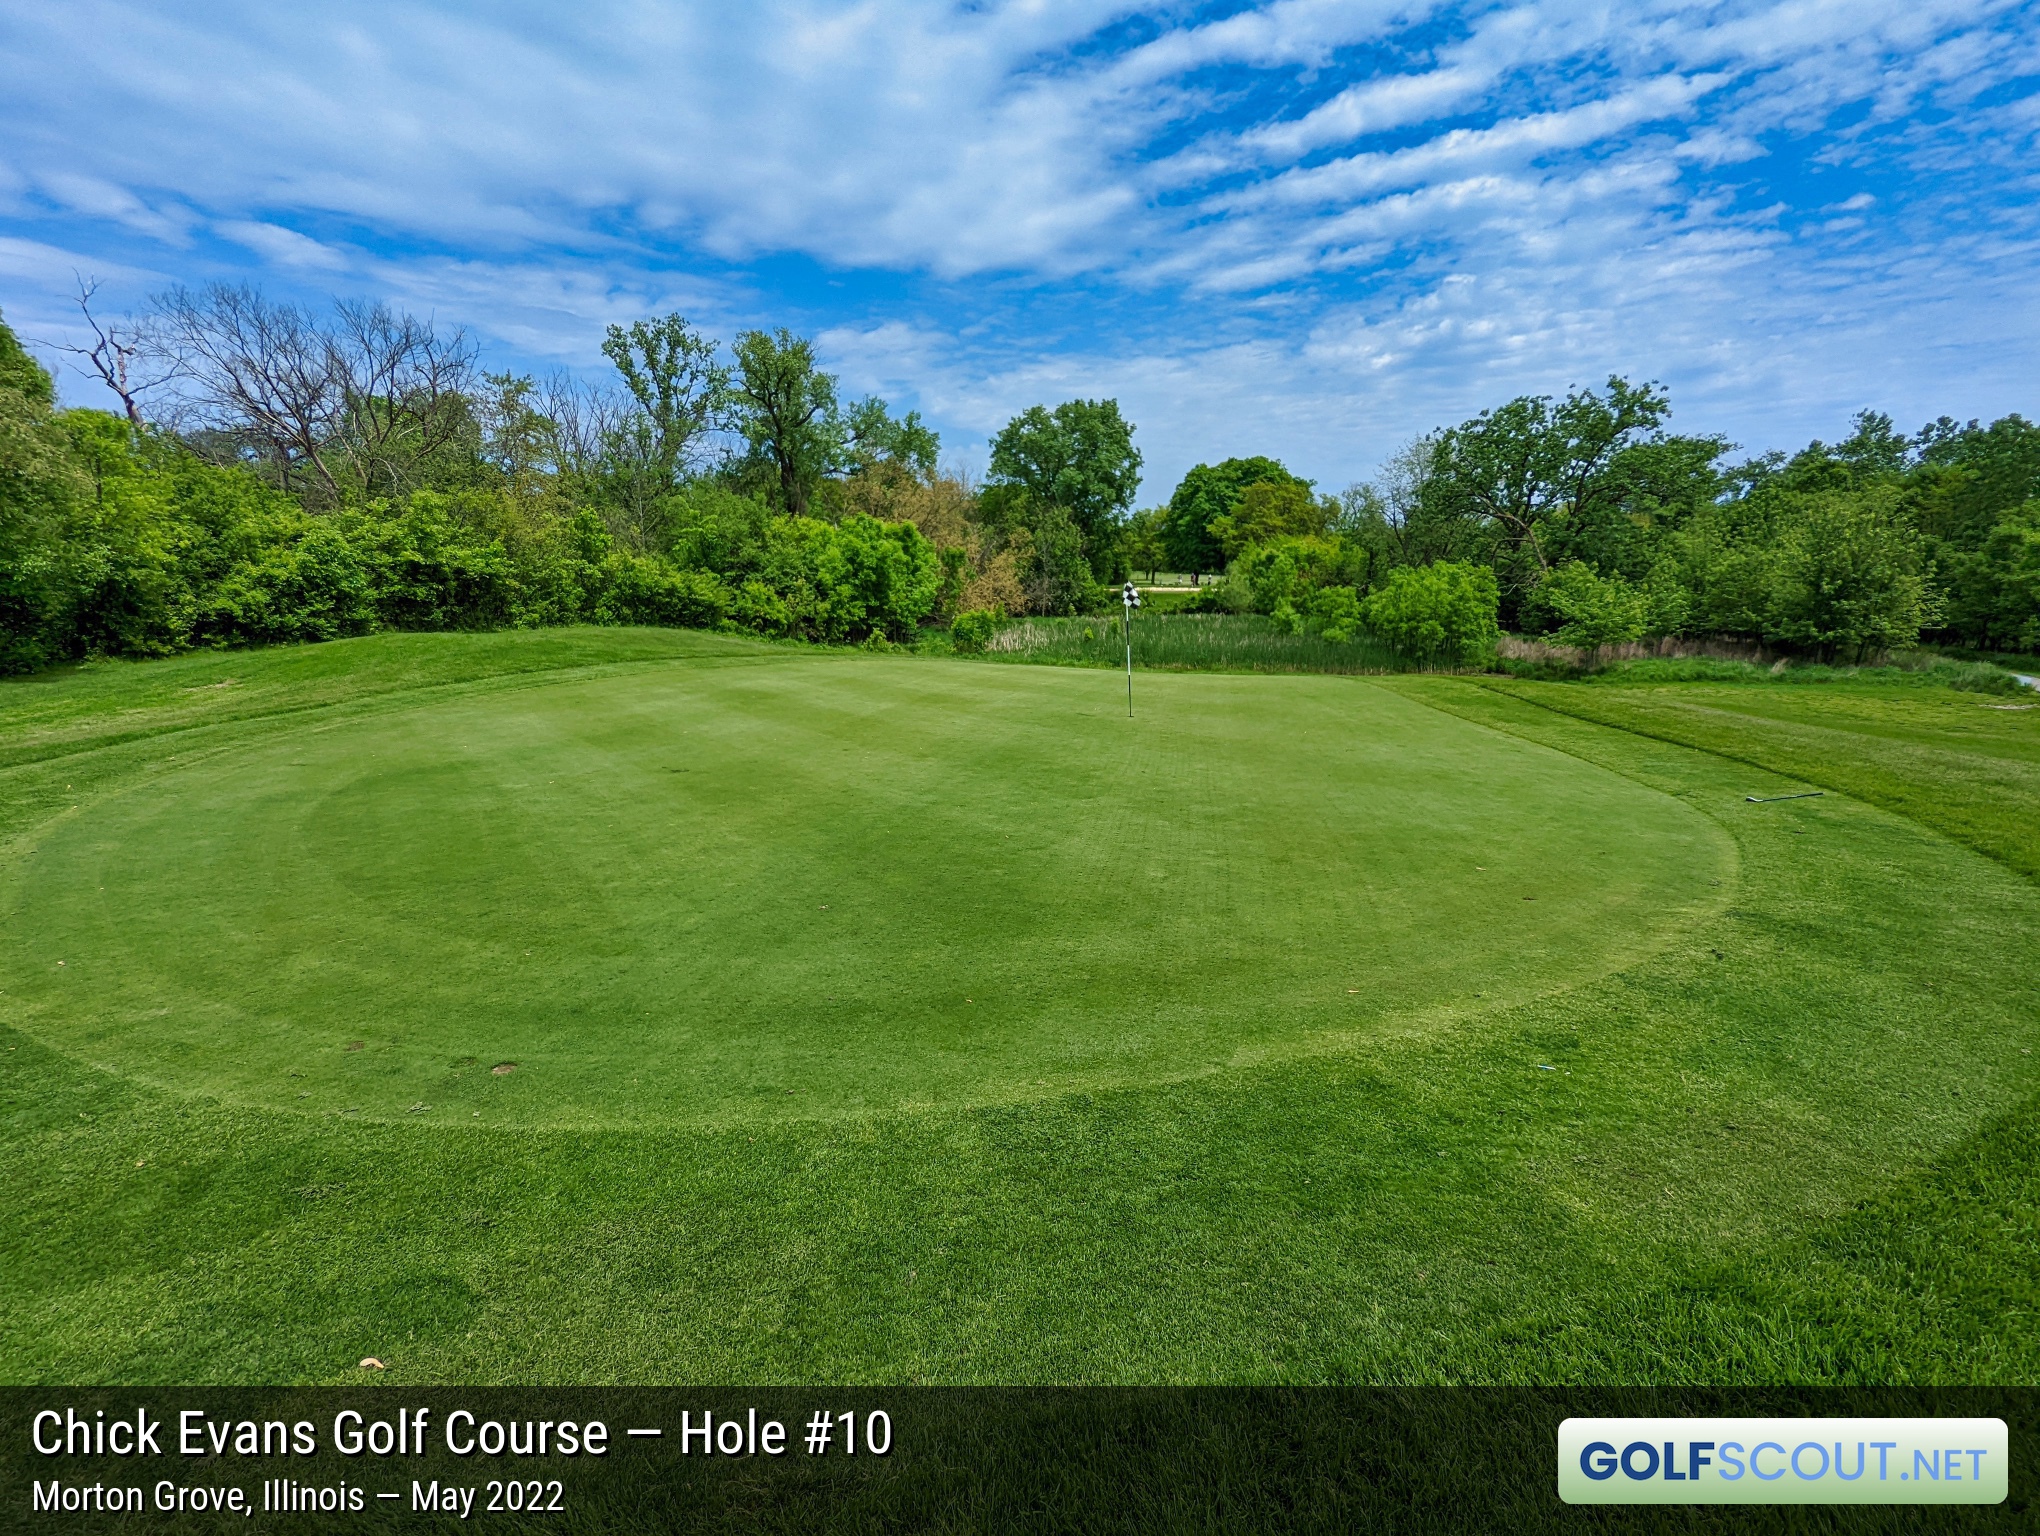 Photo of hole #10 at Chick Evans Golf Course in Morton Grove, Illinois. 